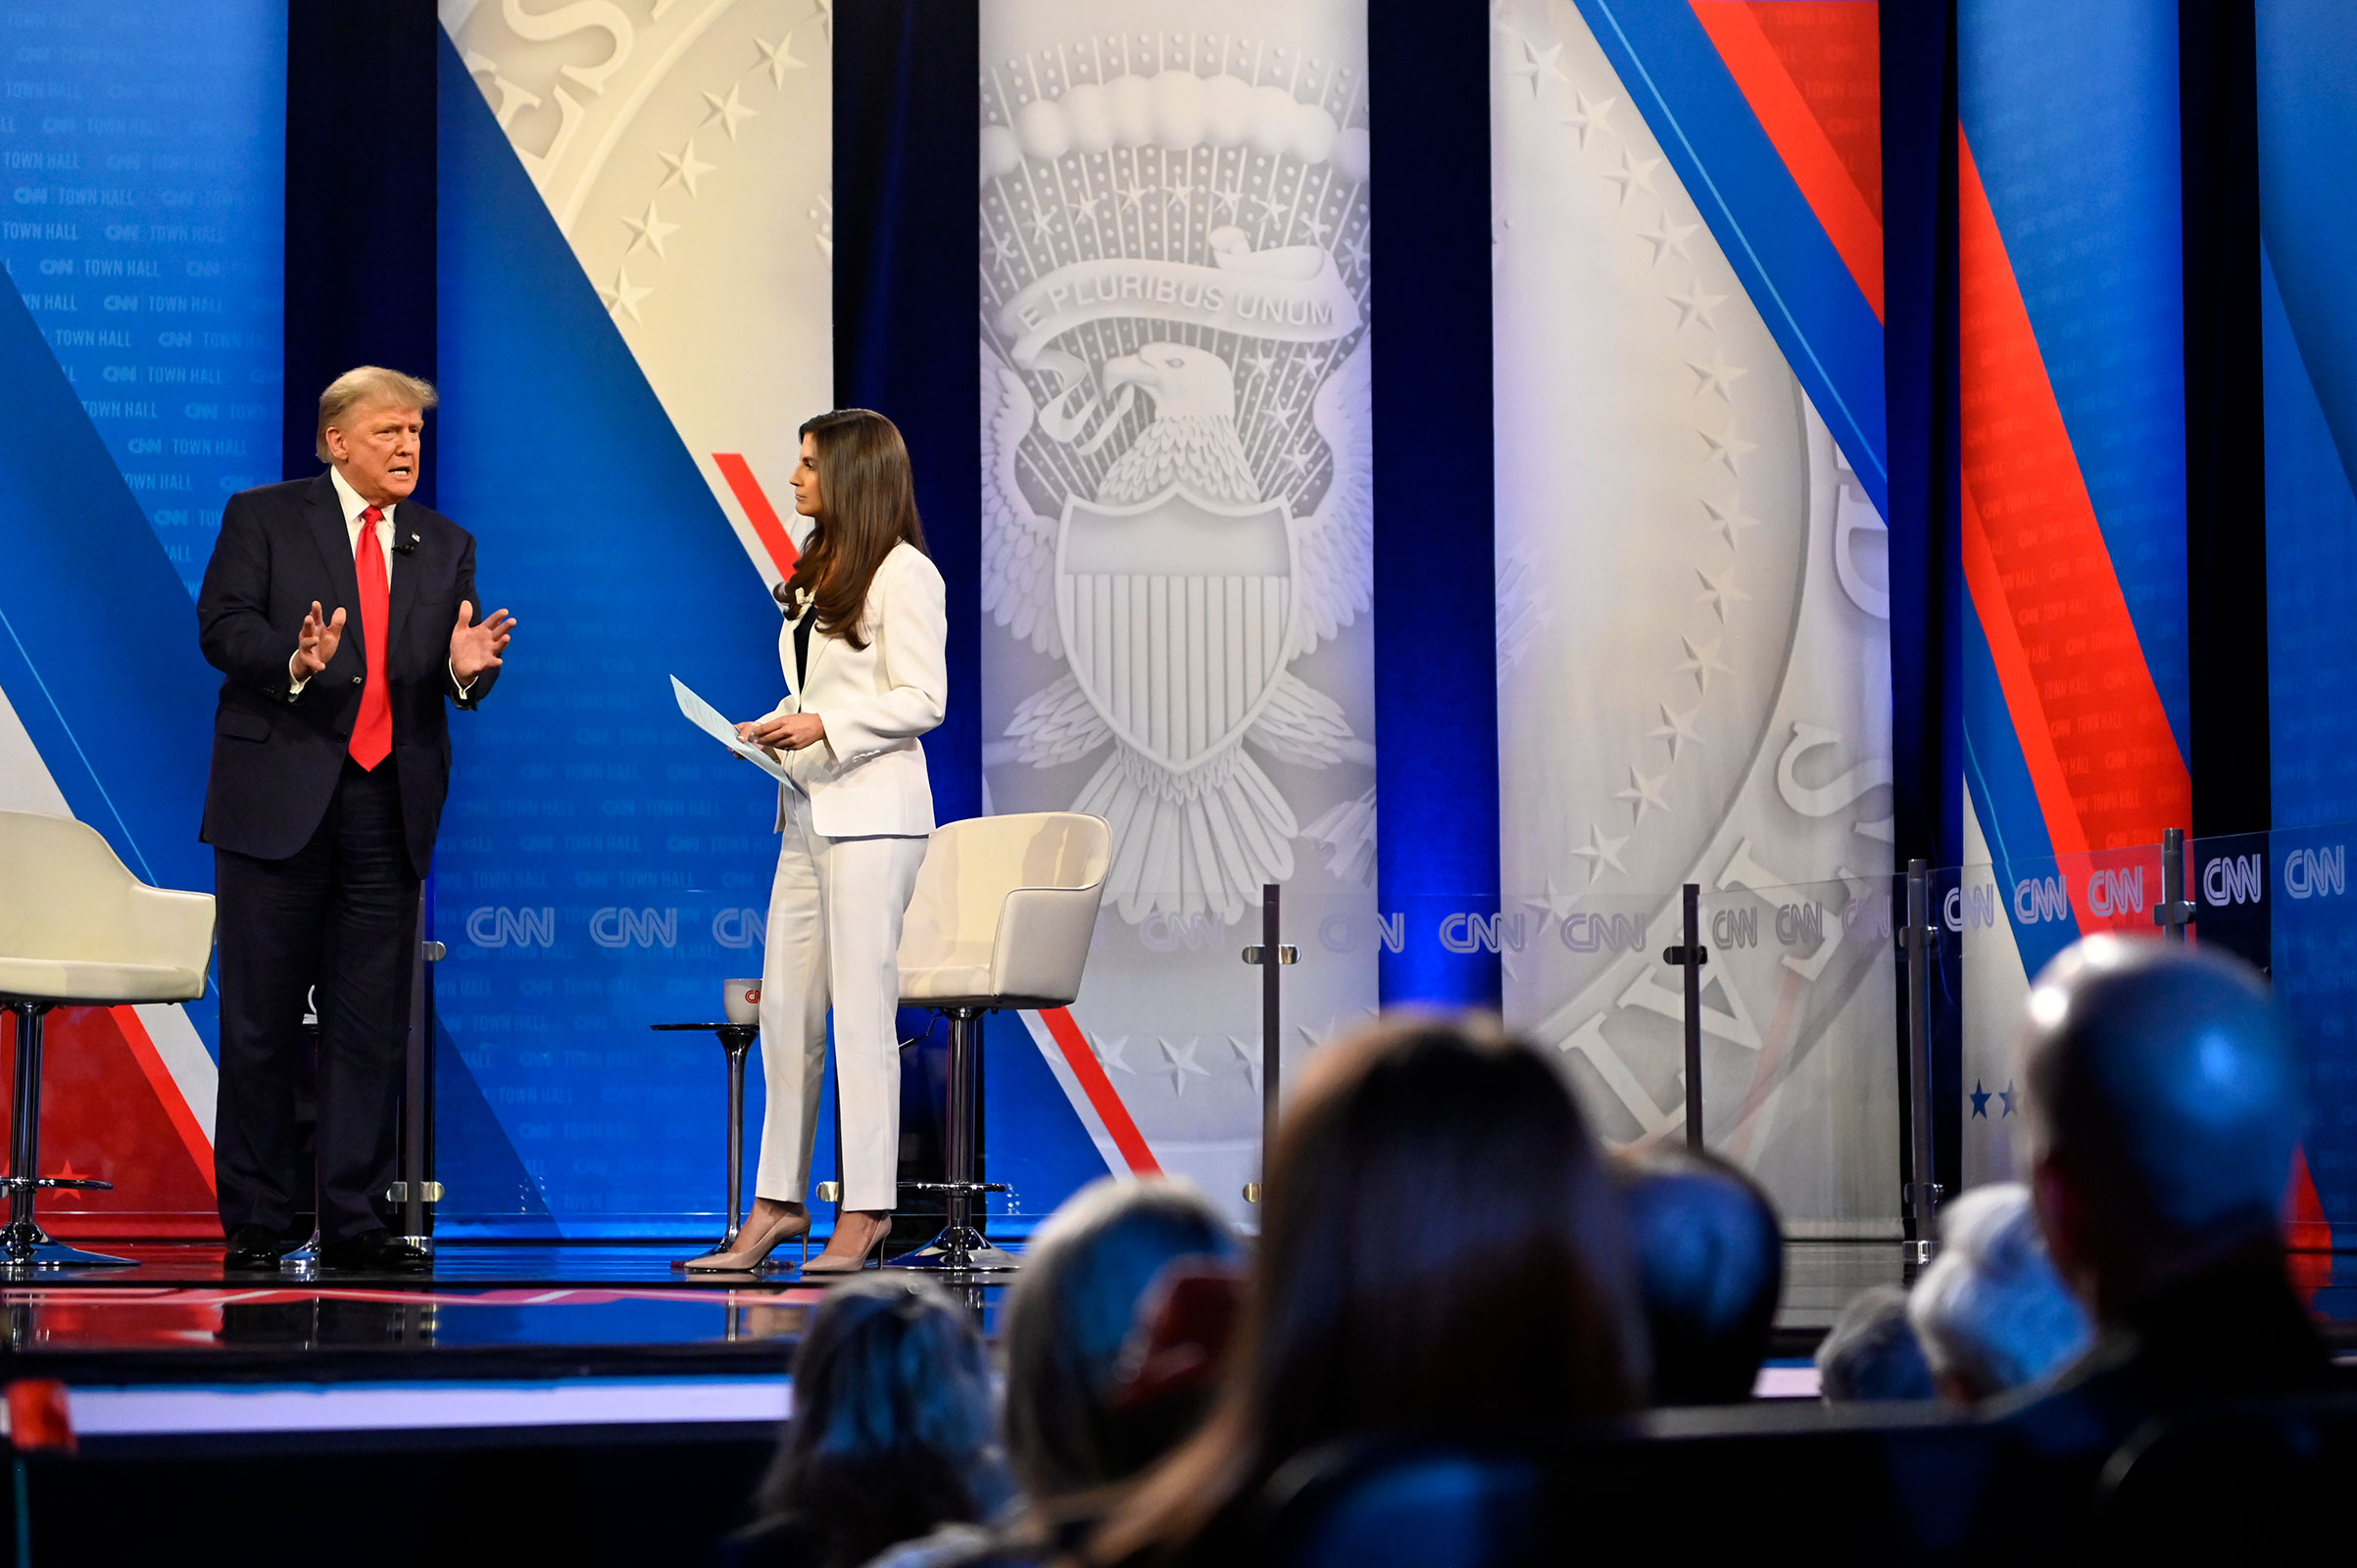 Former President Donald Trump participates in a CNN Republican Town Hall moderated by CNN’s Kaitlan Collins at St. Anselm College in Manchester, New Hampshire, on Wednesday, May 10.